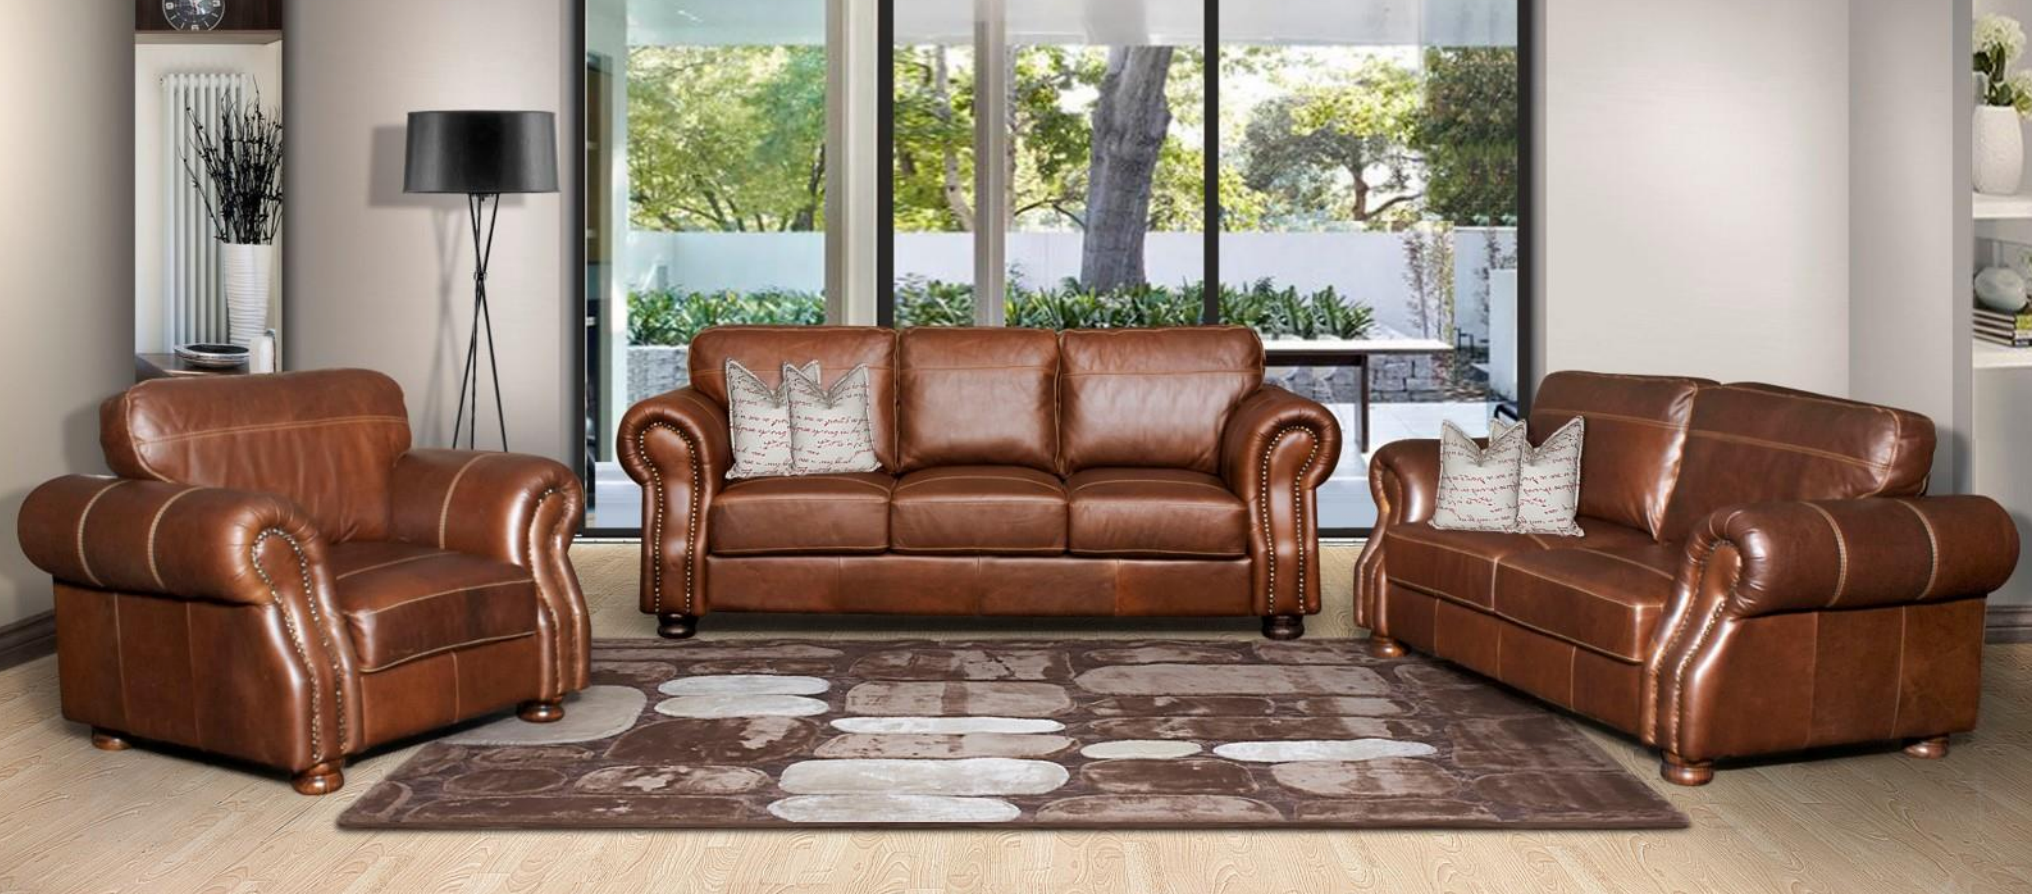 3 Piece Moremi Lounge Suite - FULL LEATHER ONLY